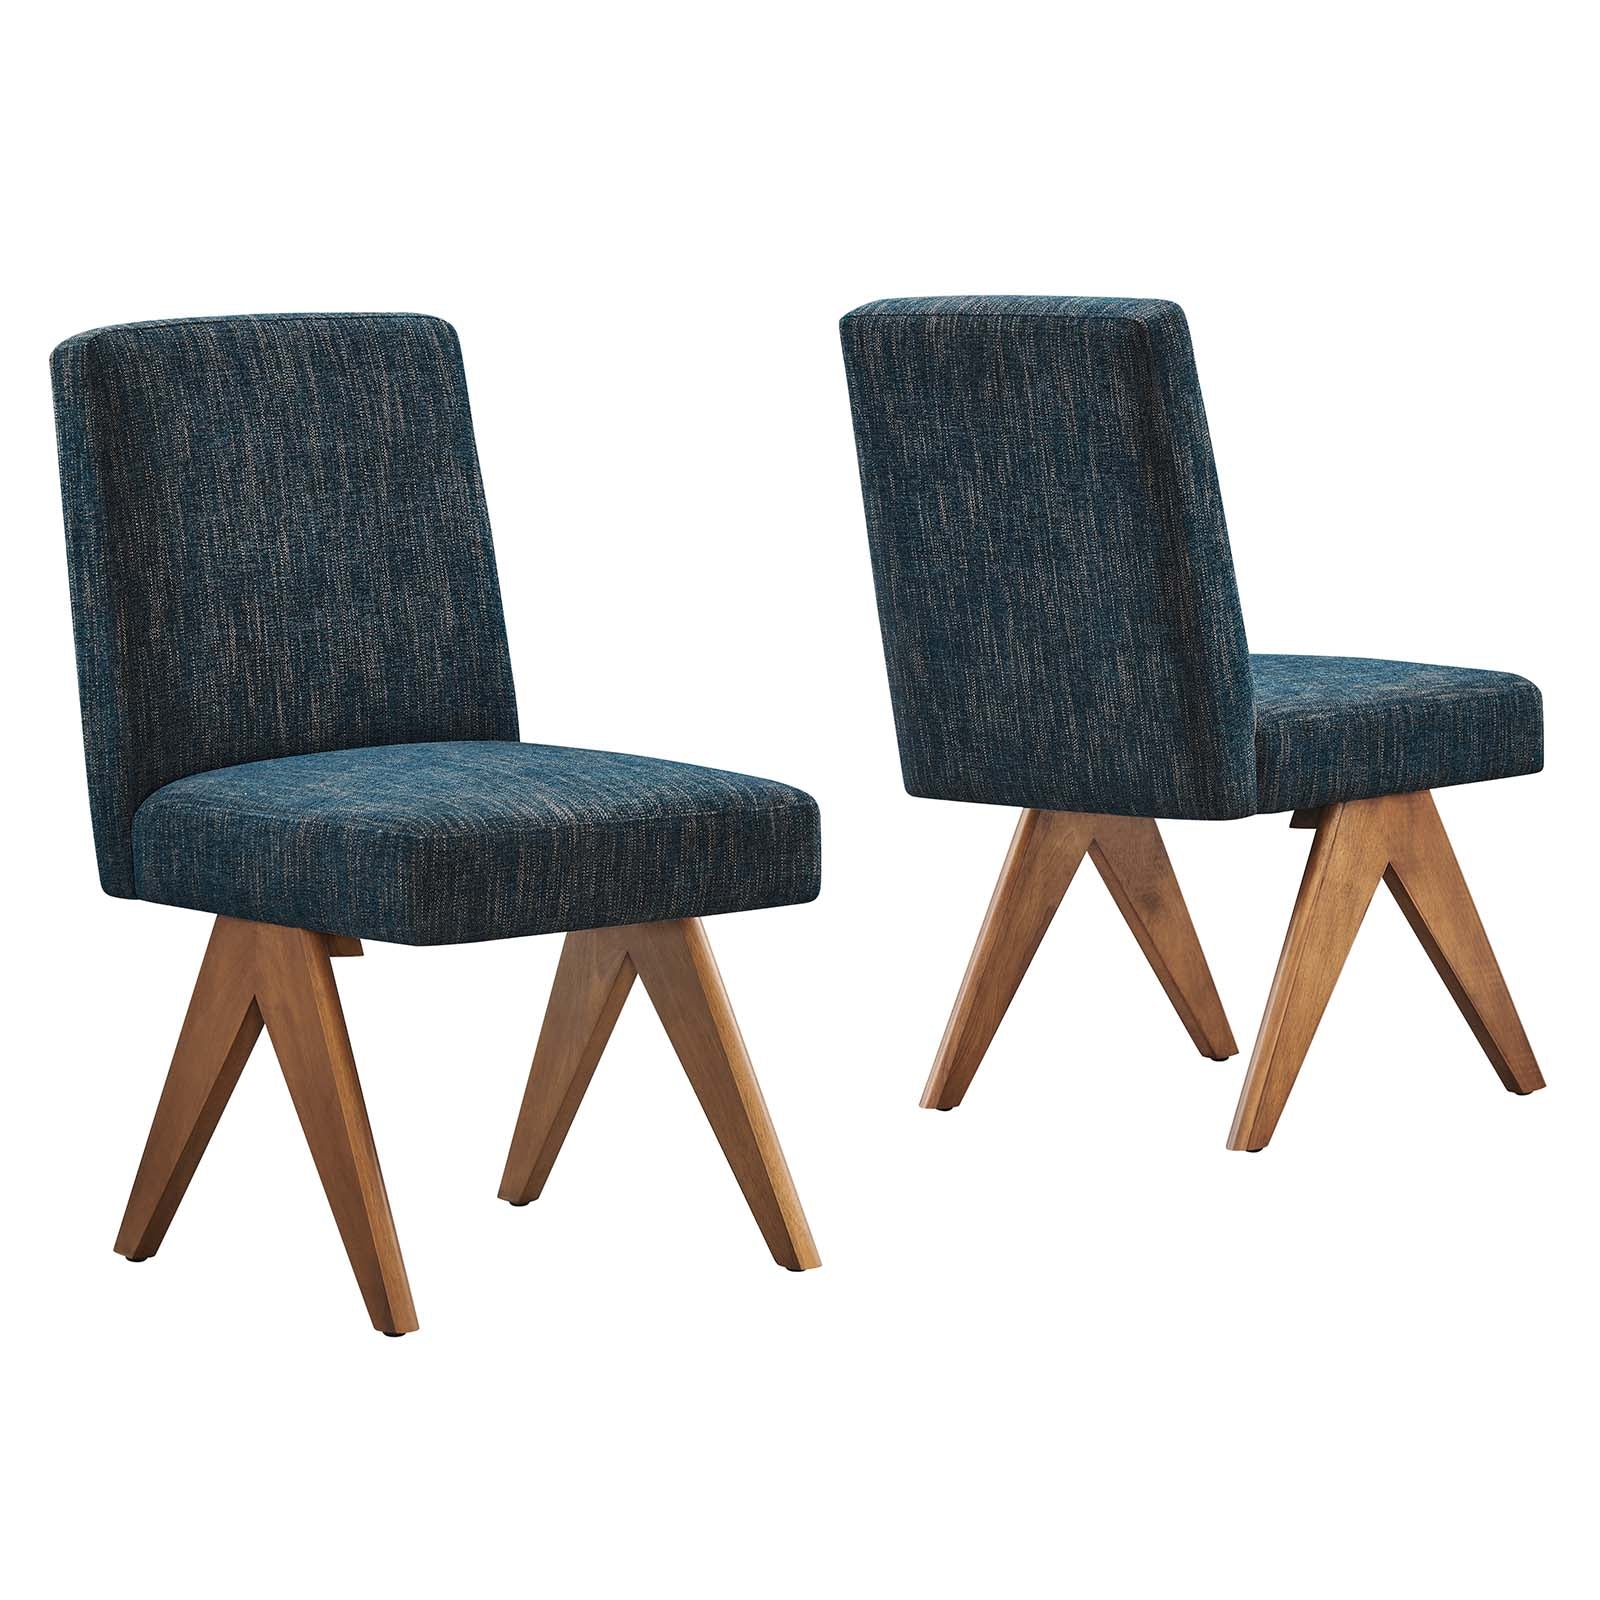 Lyra Fabric Dining Room Side Chair - Set of 2 - East Shore Modern Home Furnishings